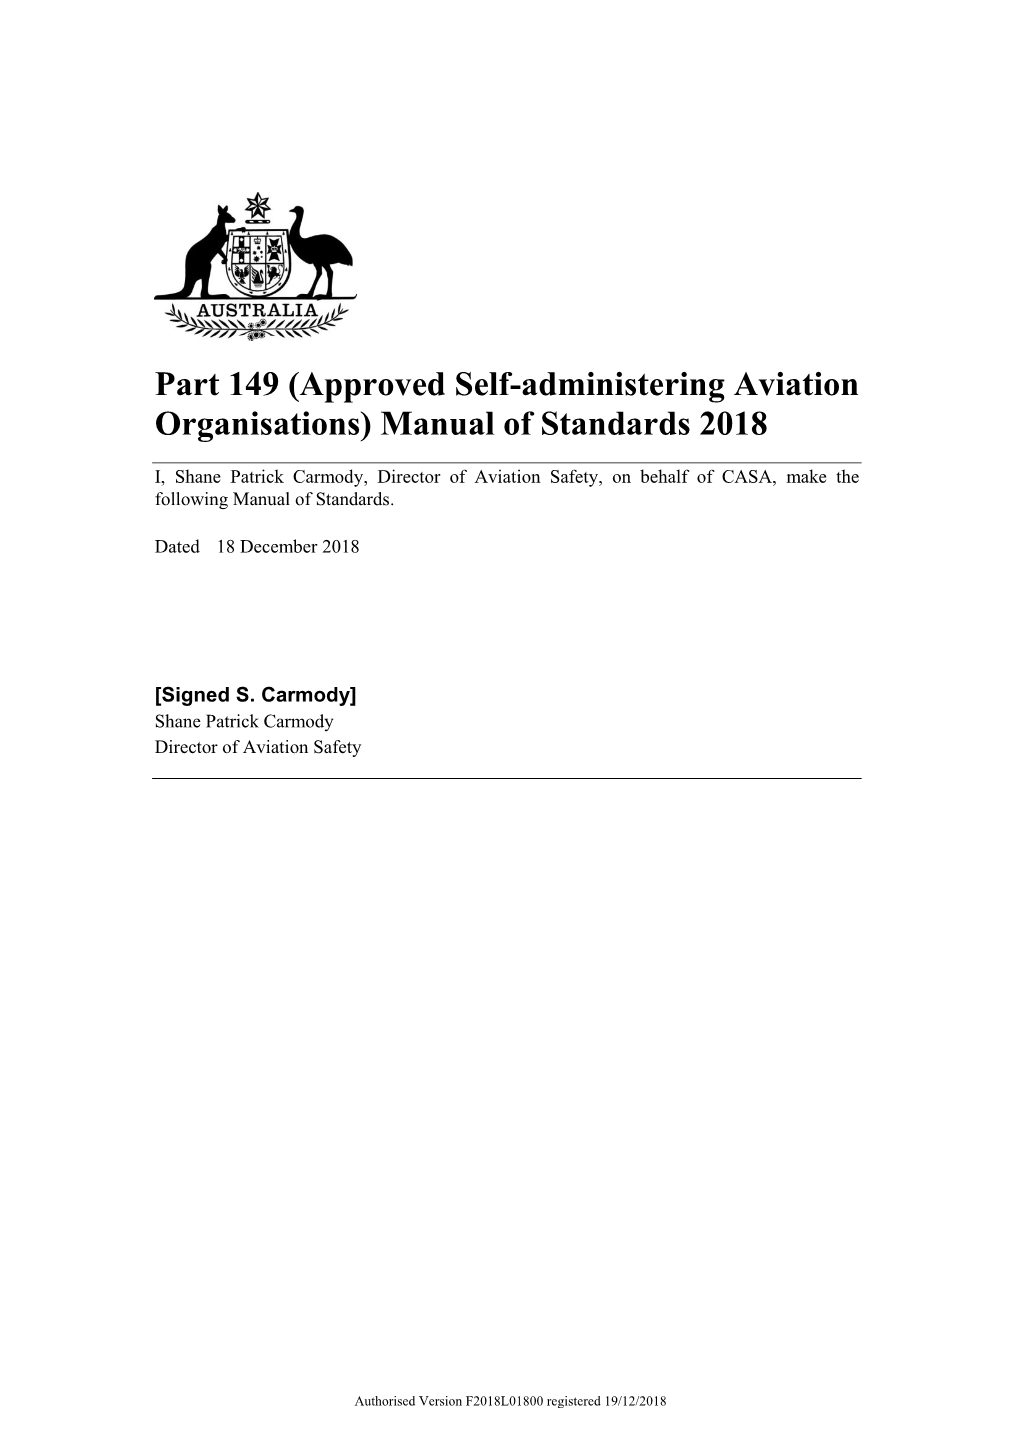 Part 149 (Approved Self-Administering Aviation Organisations) Manual of Standards 2018